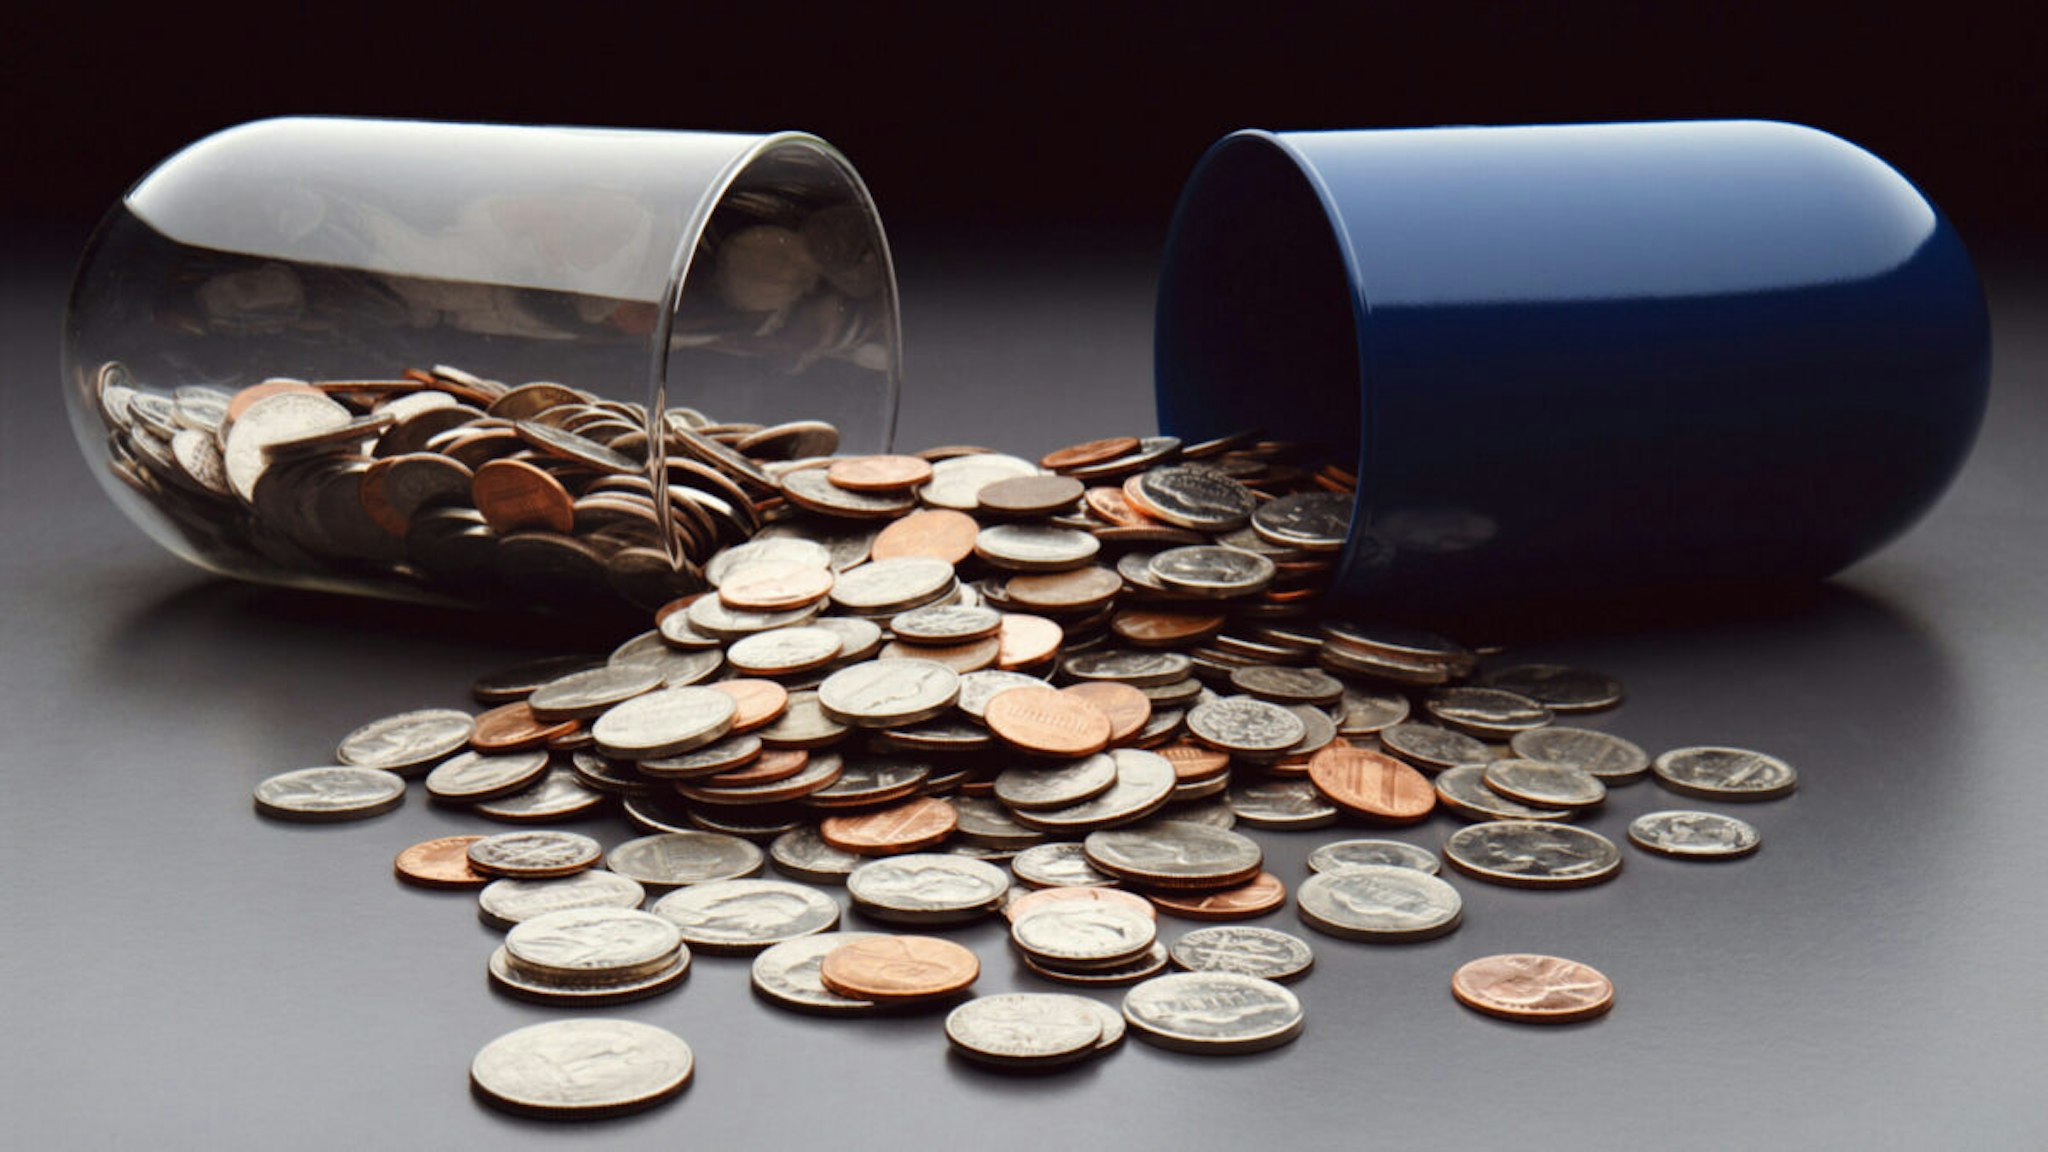 USA coins spilling out of broken capsule - stock photo.